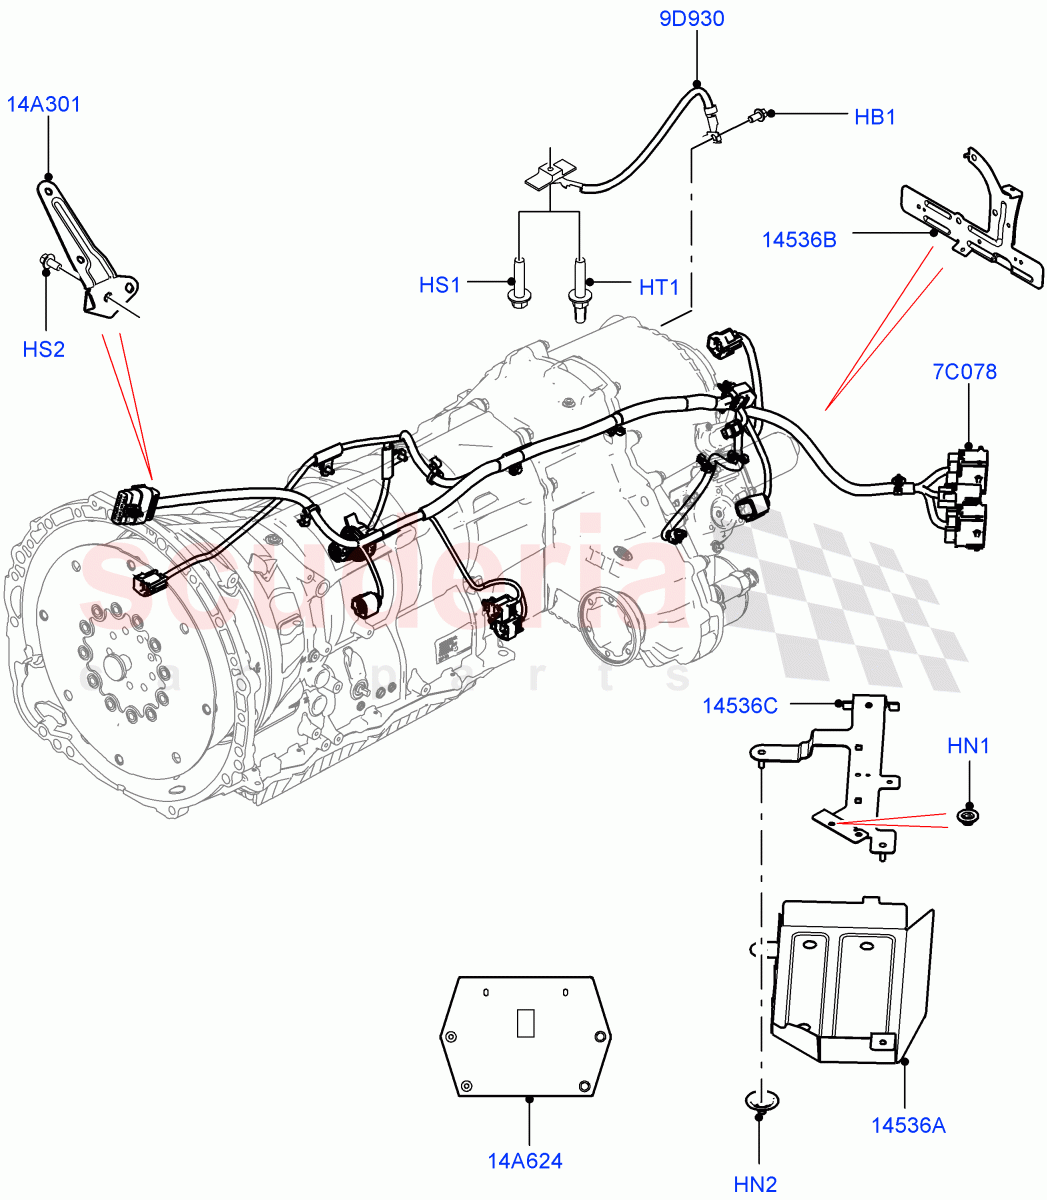 Electrical Wiring - Engine And Dash(Transmission)((V)TOFA999999) of Land Rover Land Rover Range Rover Sport (2014+) [2.0 Turbo Diesel]